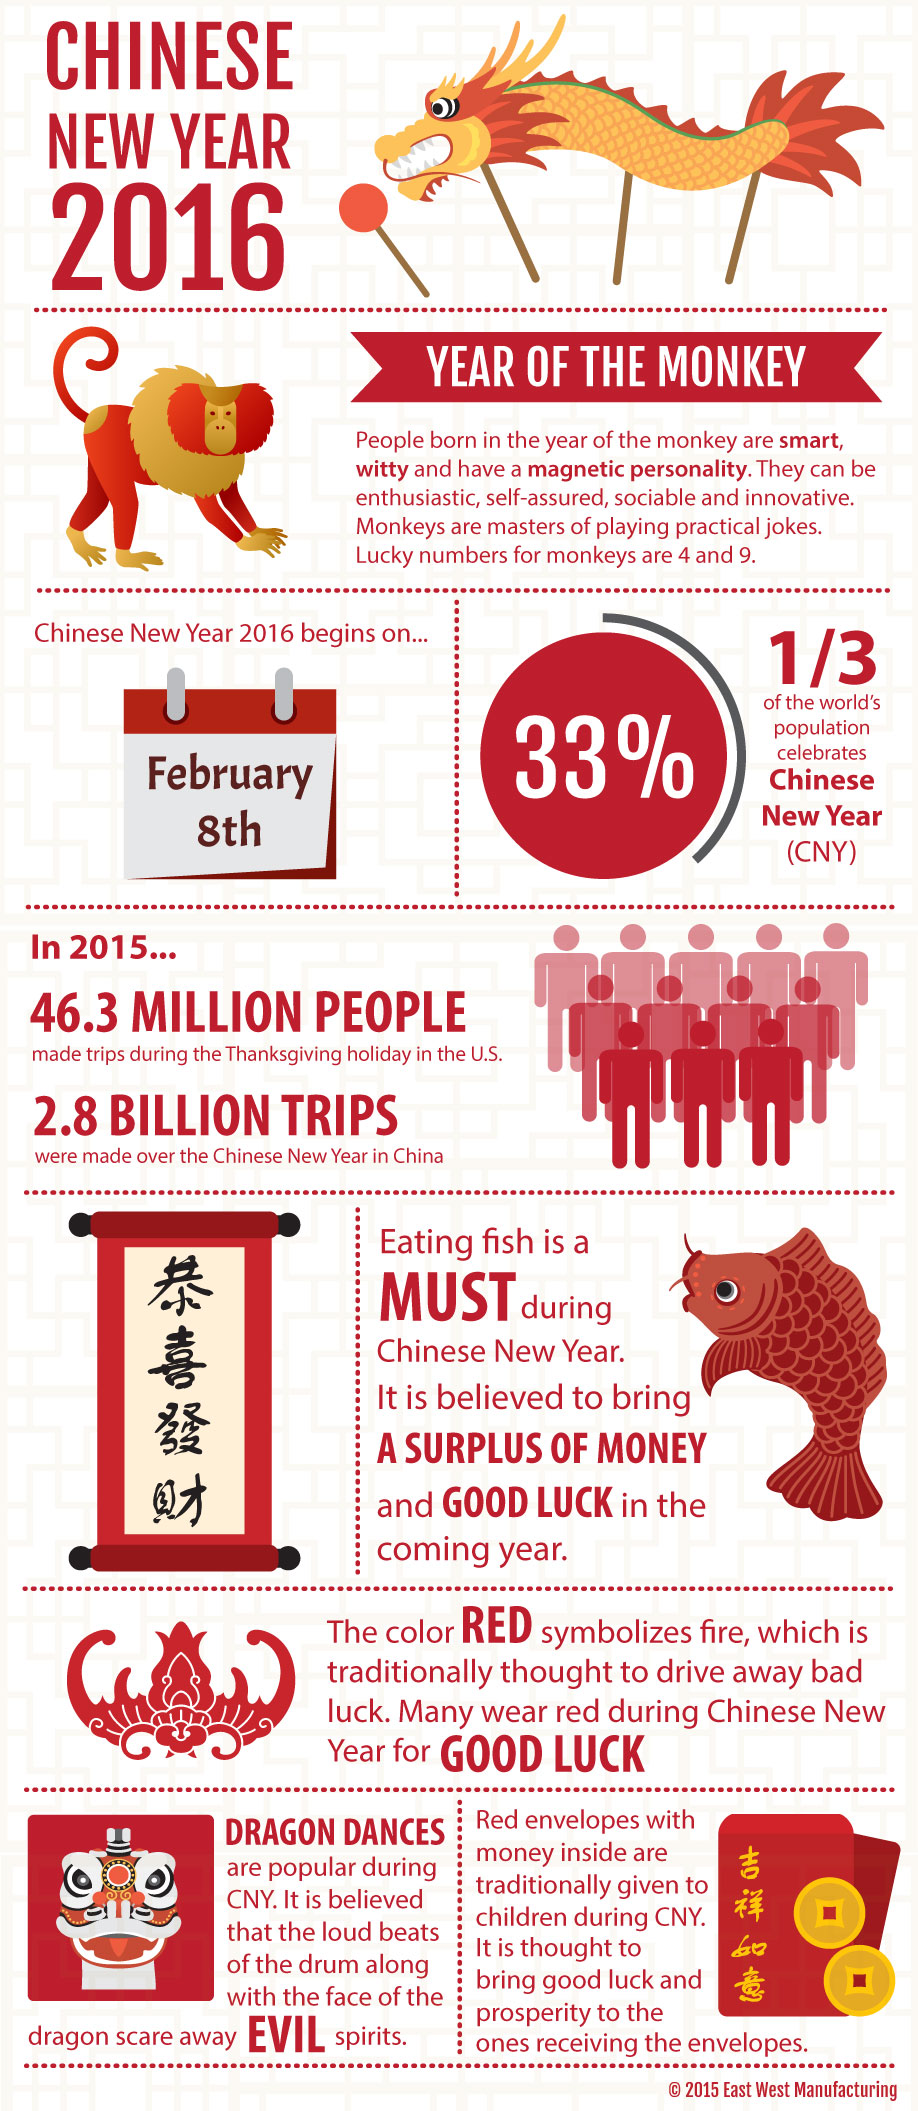 Infographic Presentation Poster On Chinese Culture 467357 - Download Free Vectors, Clipart ...